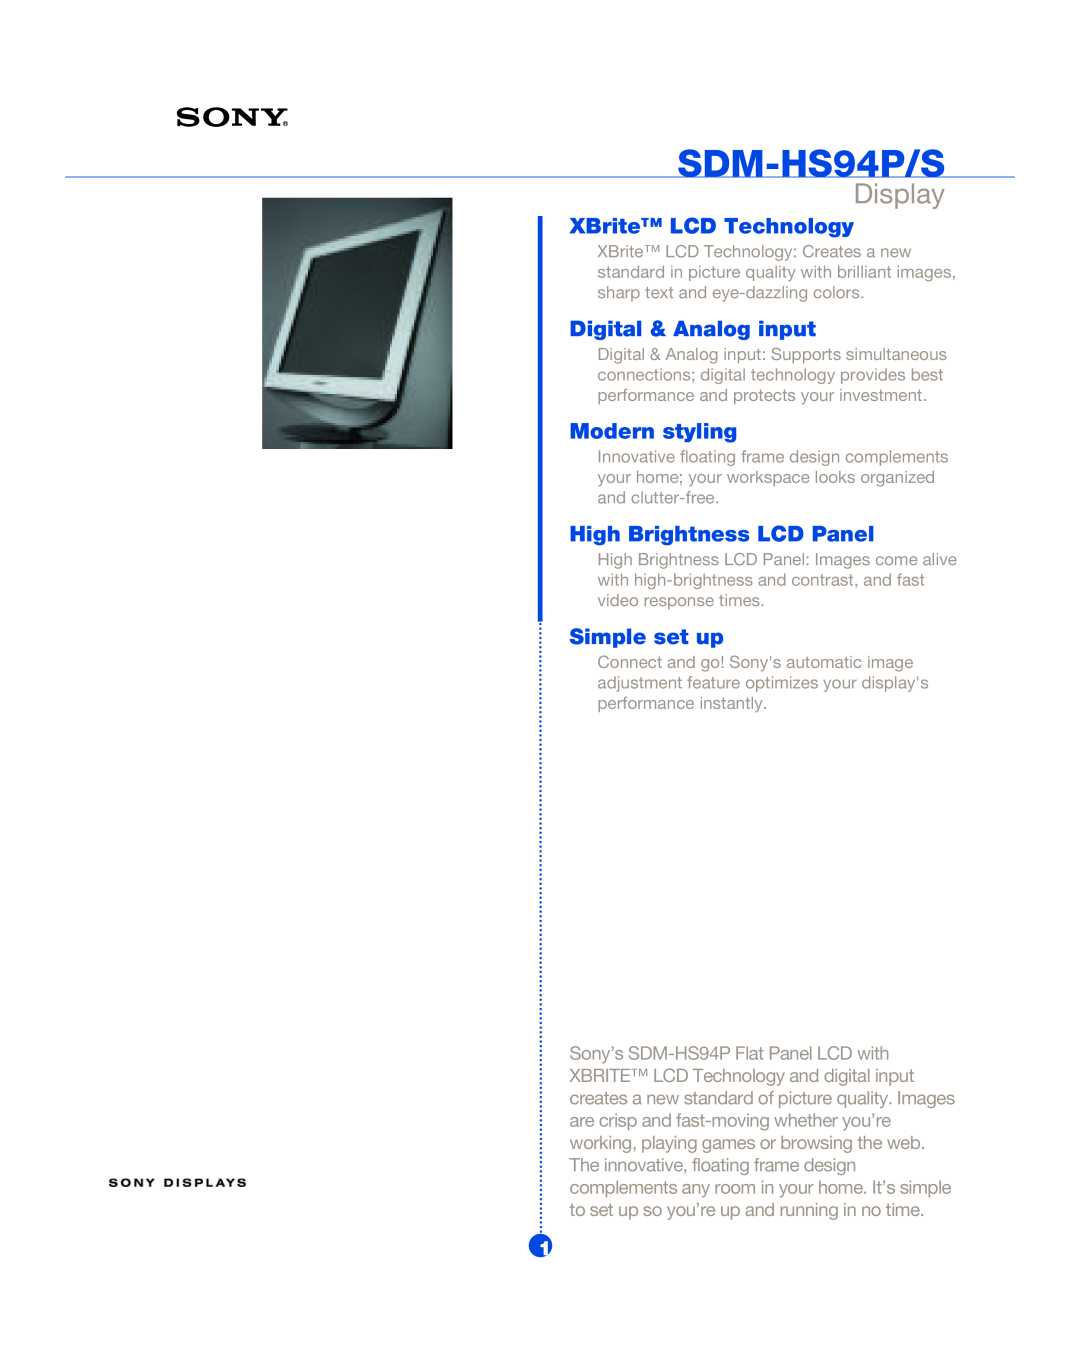 Sony manual SDM-HS94P/S, Display, XBrite LCD Technology, Digital & Analog input, Modern styling, Simple set up 